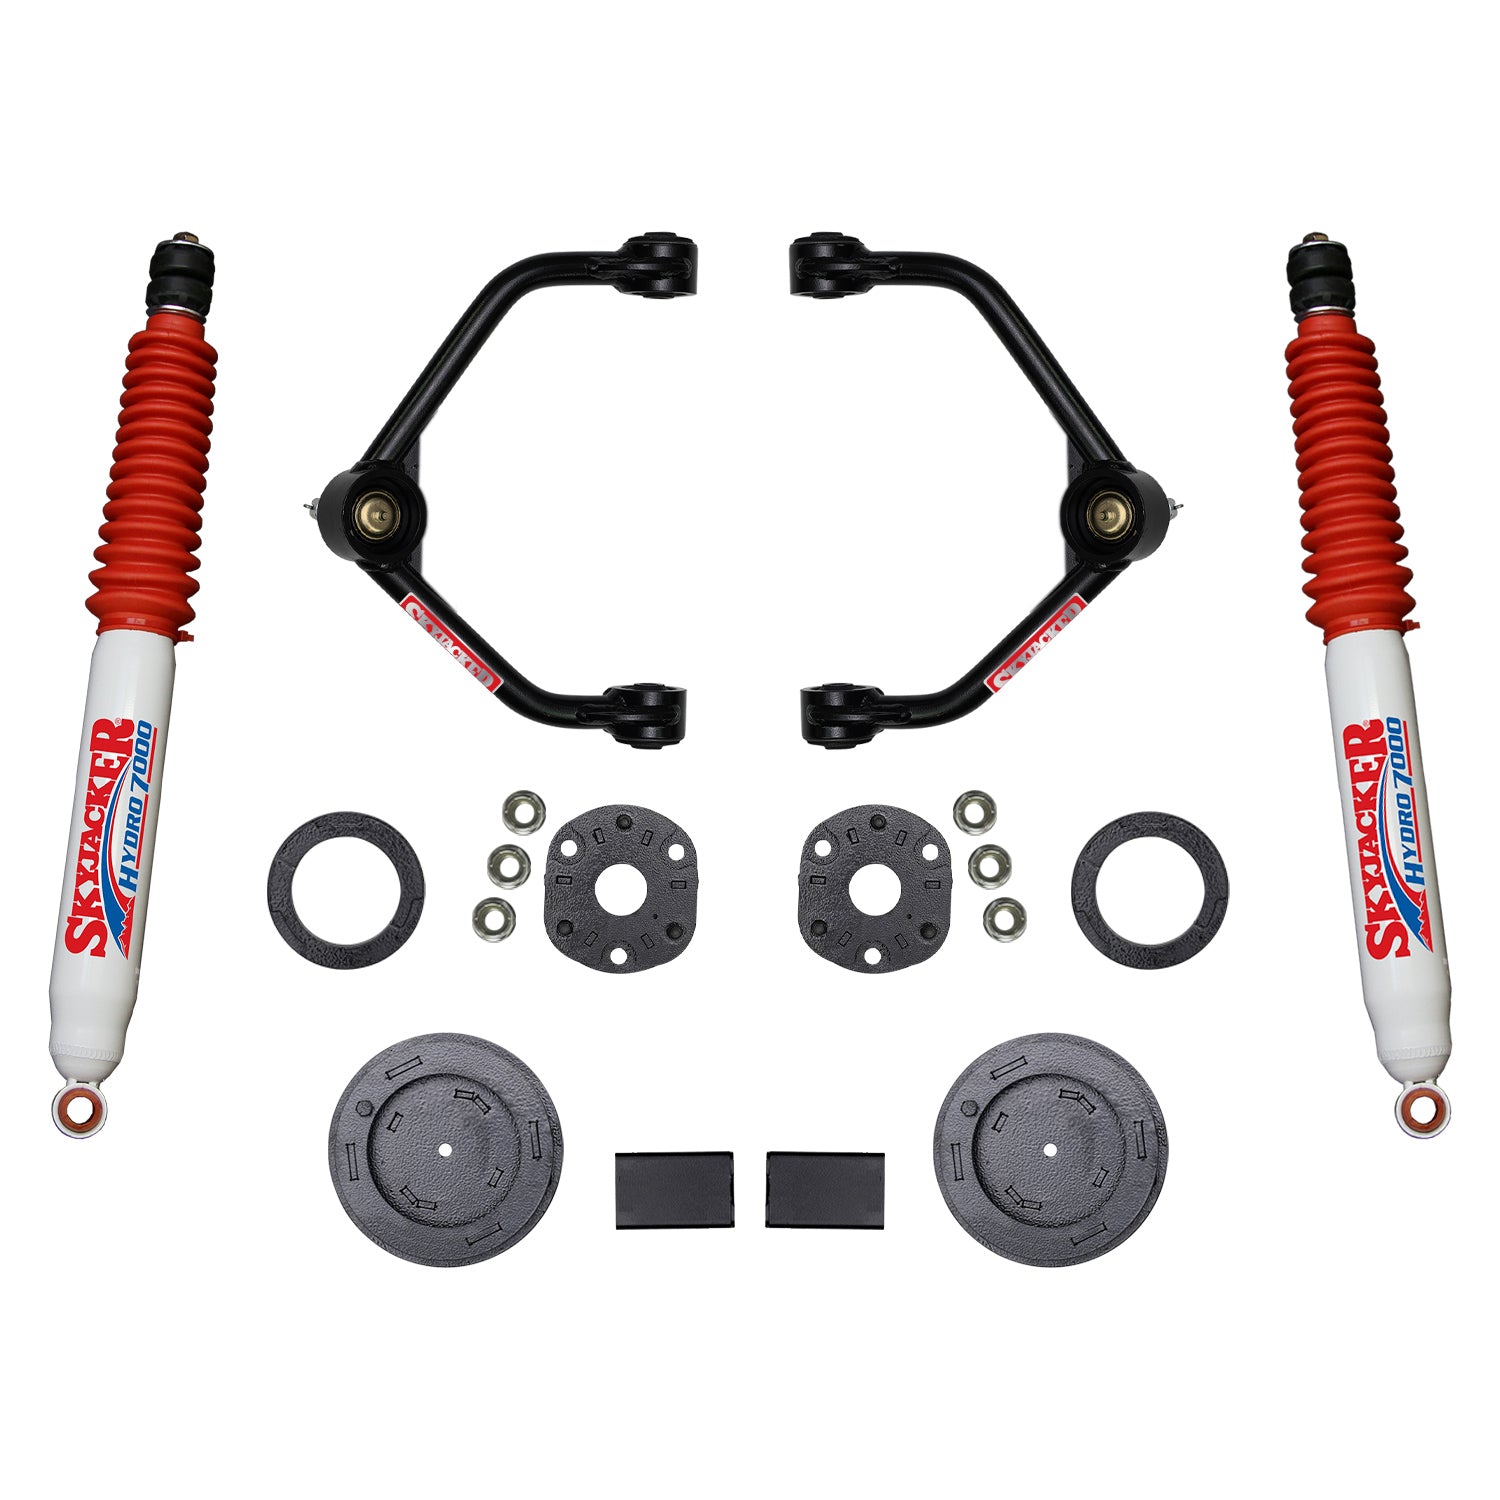 3 Inch Suspension Lift Kit With Front Strut Spacers Front Upper A-arms Rear Coil Spring Spacers Rear Bump Stop Spacers And Rear Hydro 7000 Shocks 2019-2021 Ram 1500 Skyjacker